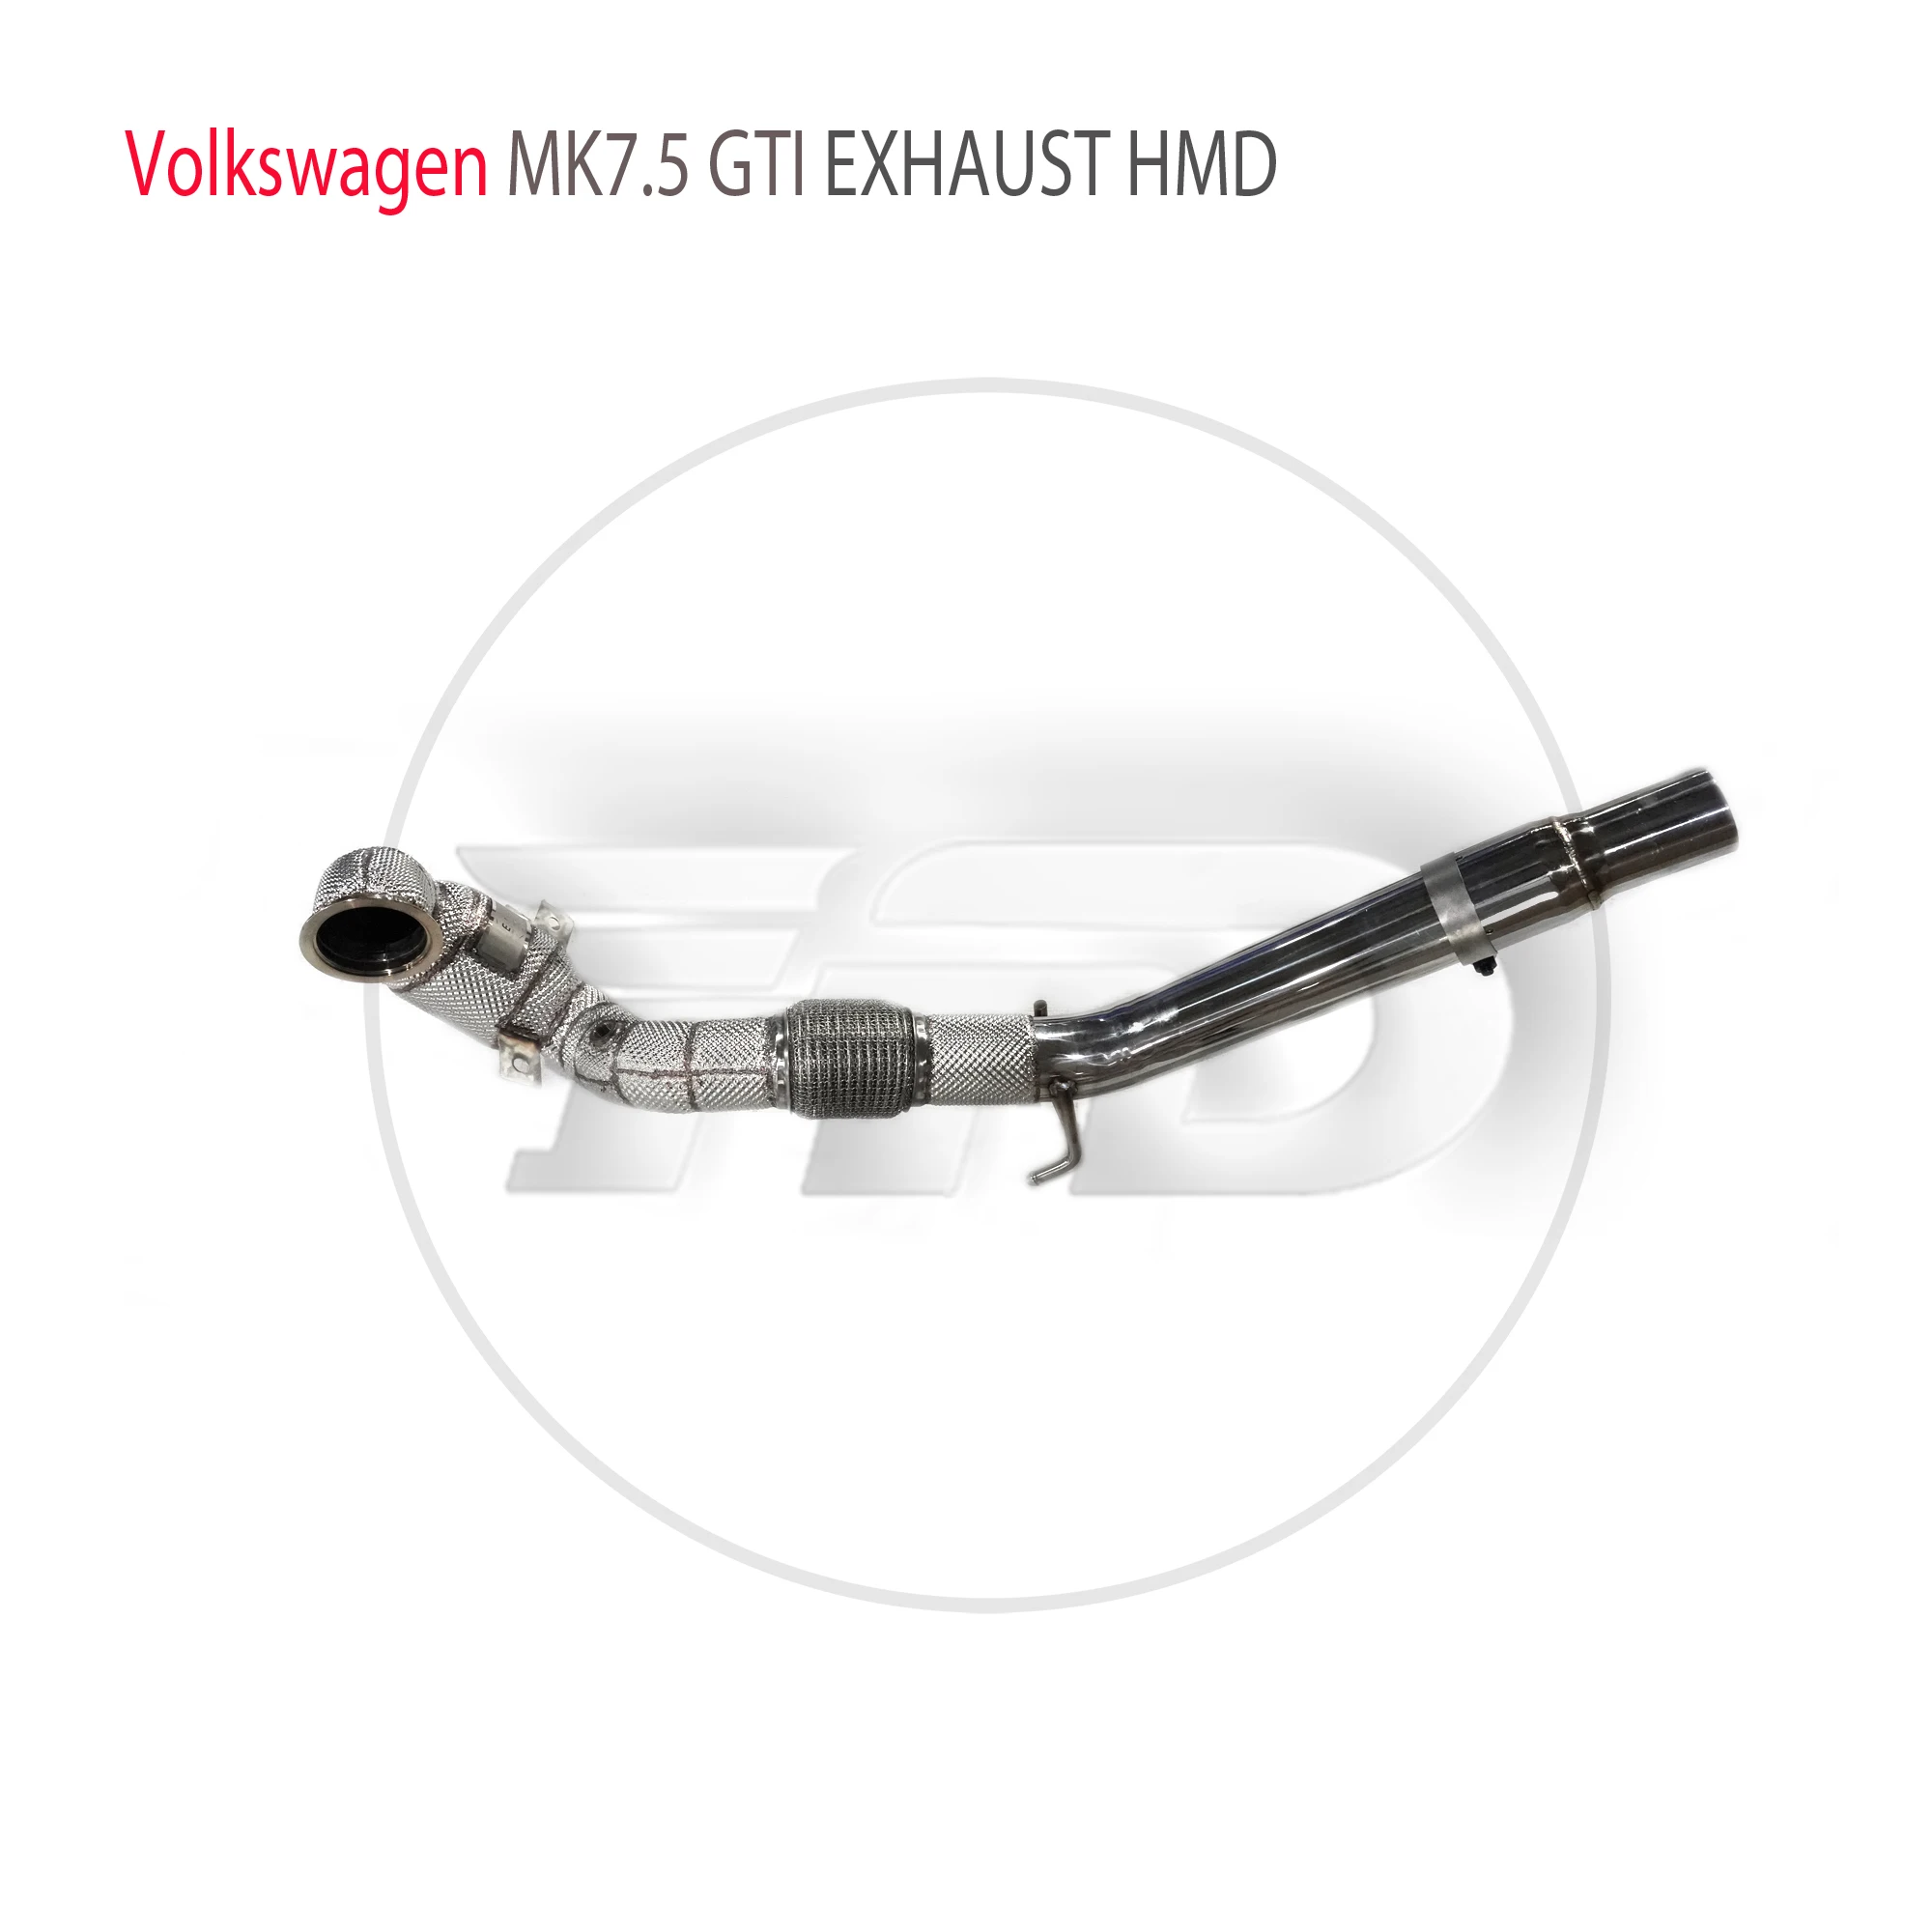 

HMD Car Accessories Exhaust Downpipe Manifold For Volkswagen VW MK7.5GTI With Catalytic Converter Header Catless Pipe